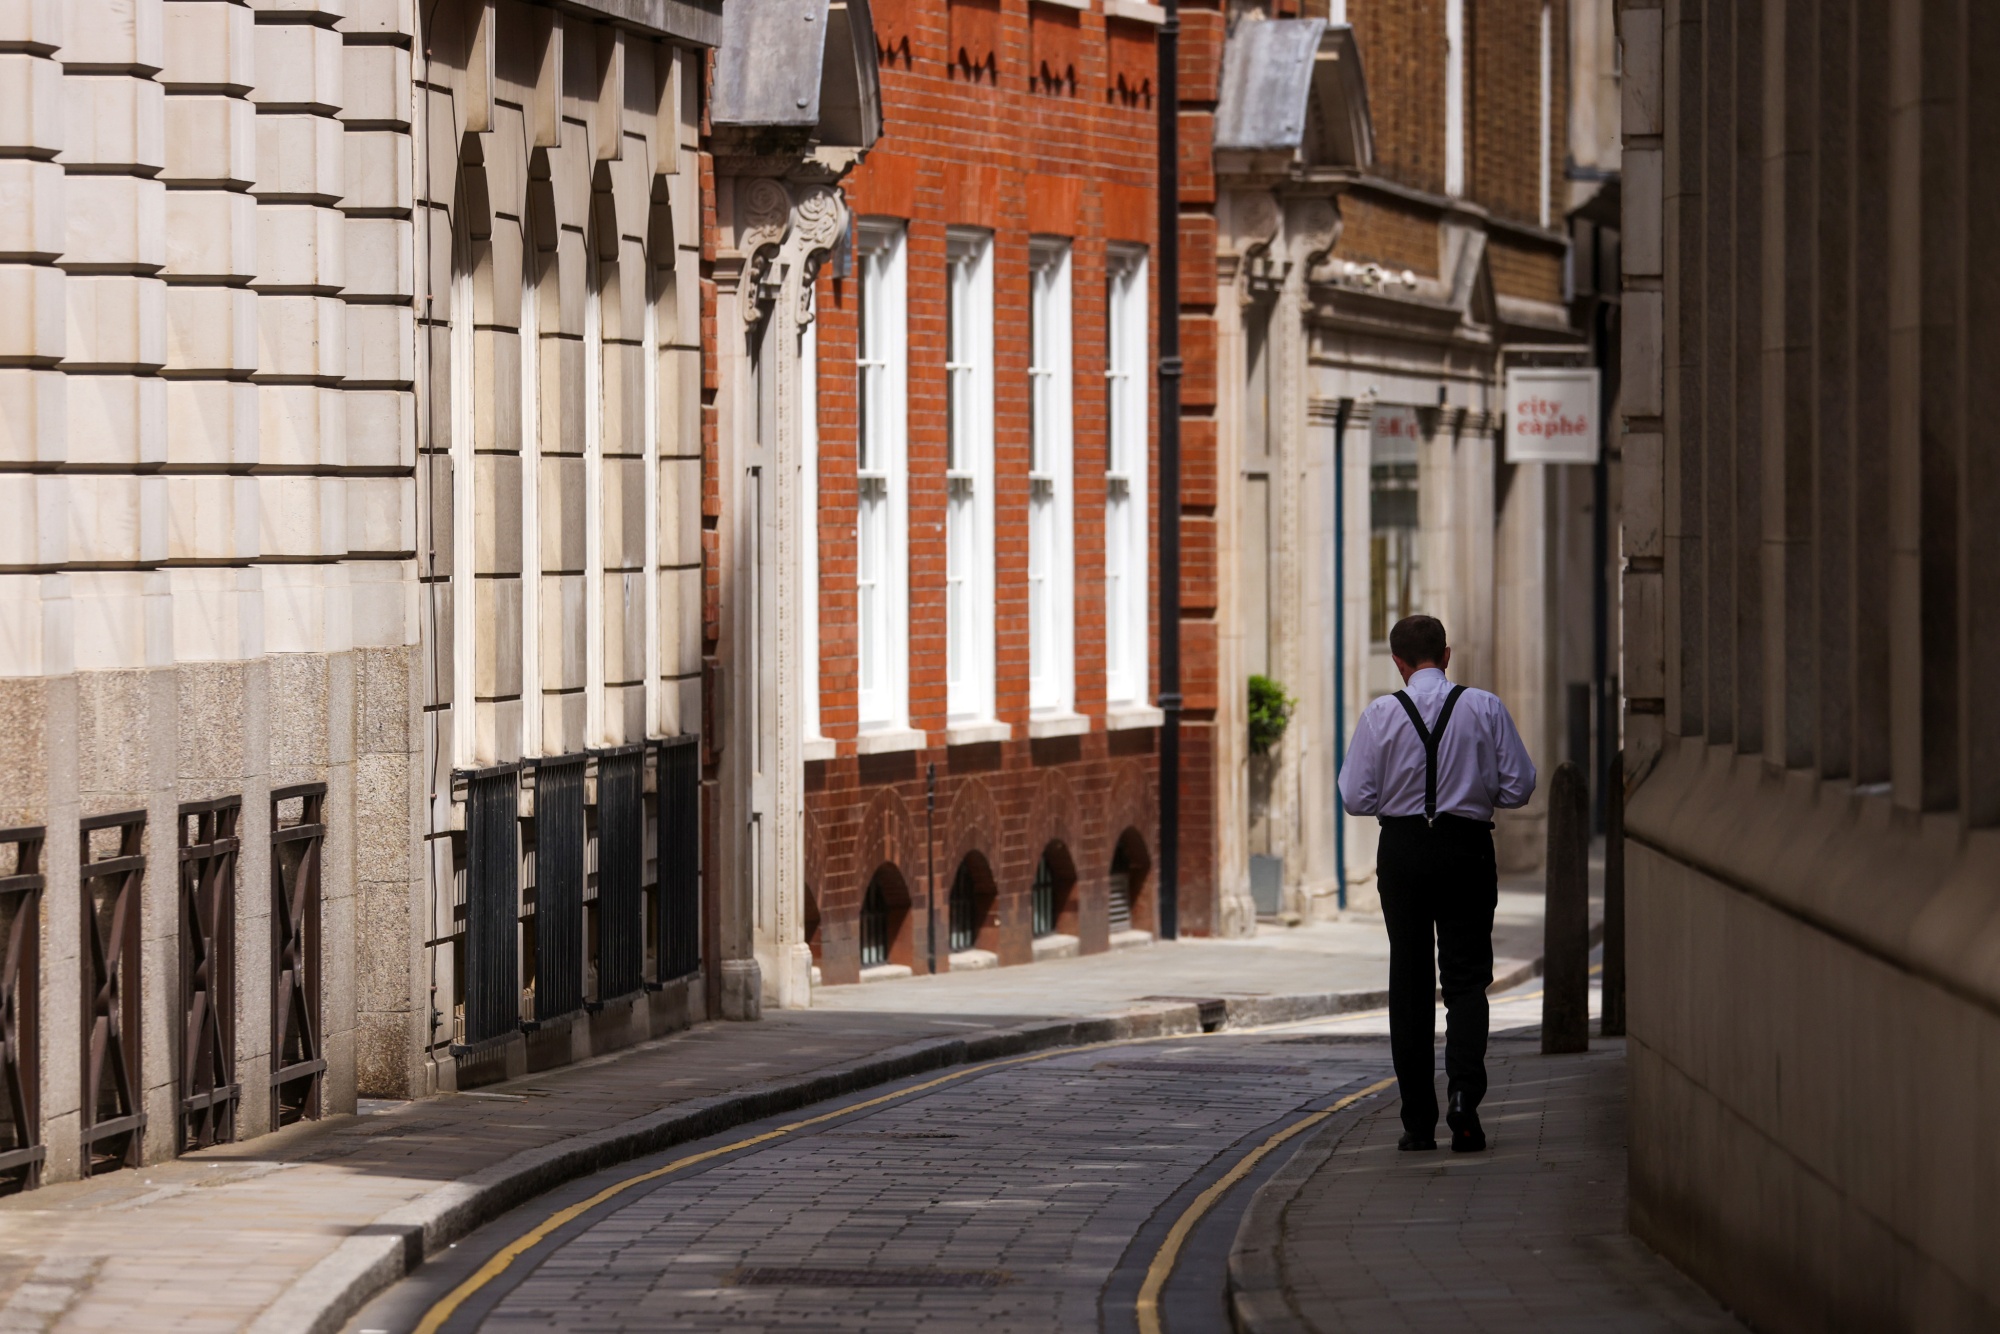 A pedestrian passes a restaurant in a narrow alley in the City of London, on June 7.